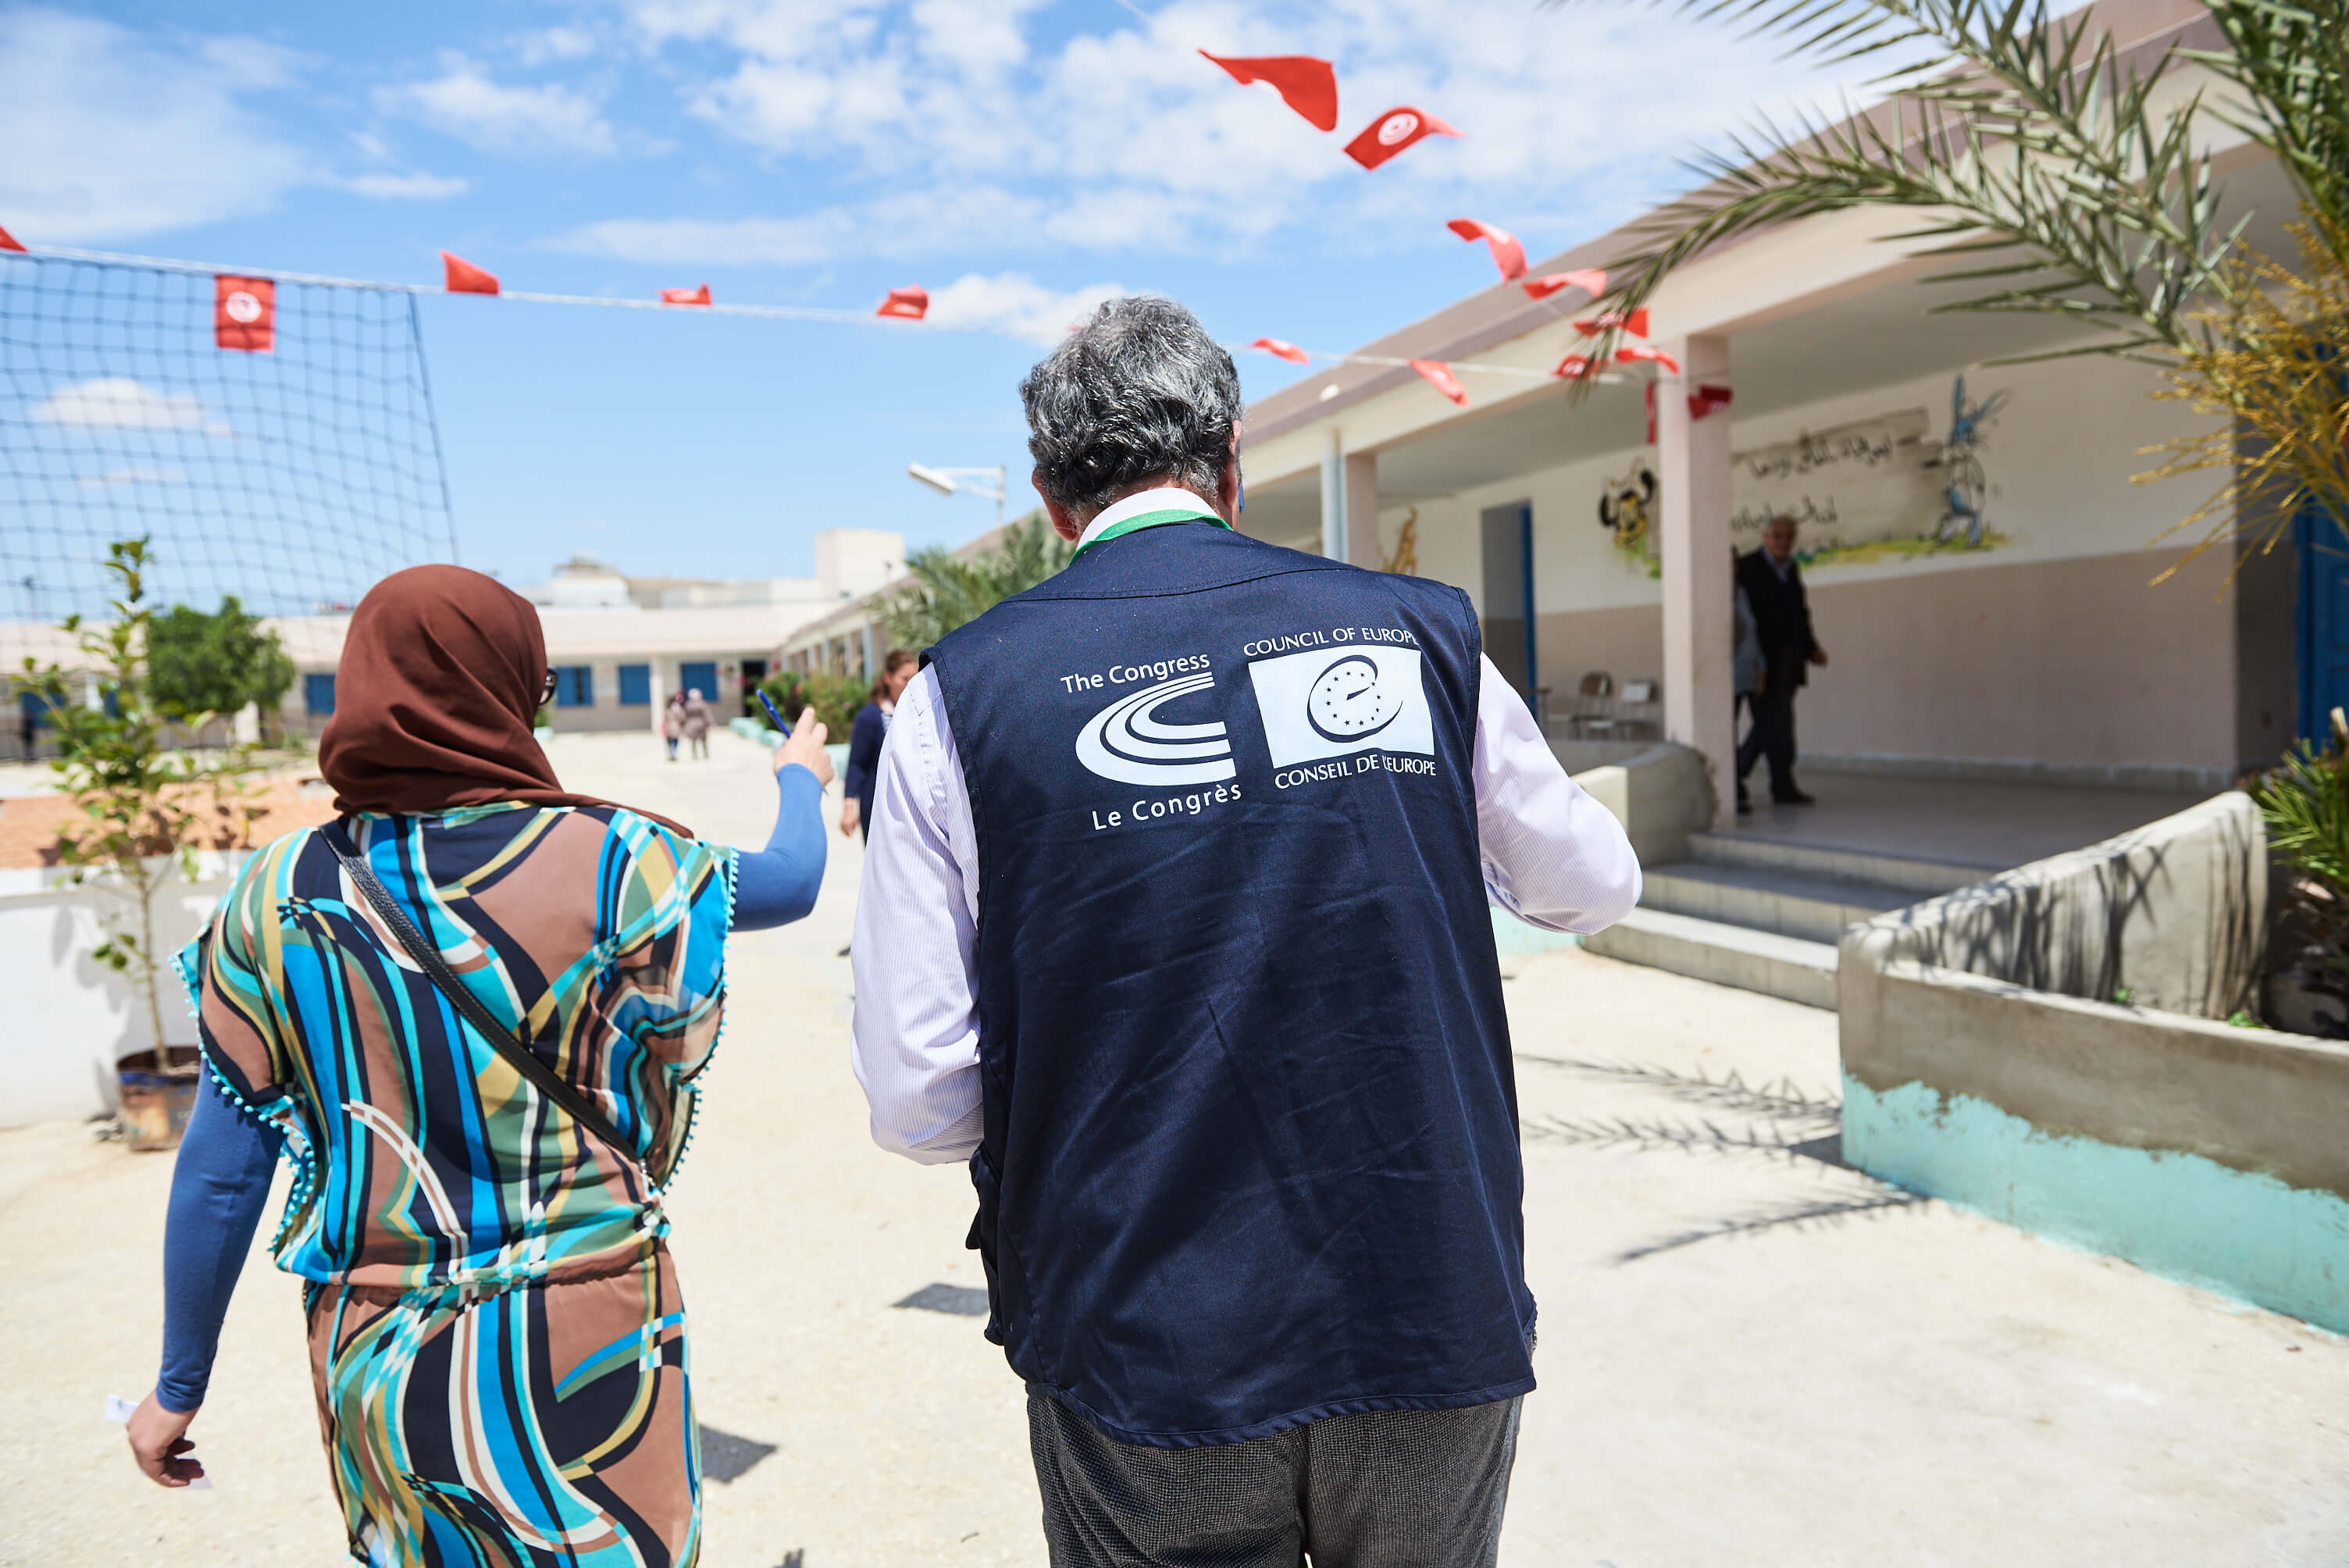 Observers from the Congress of Local and Regional Authorities in Tunisia during the municipal elections, 2018. © Congress of Local and Regional Authorities/Flickr